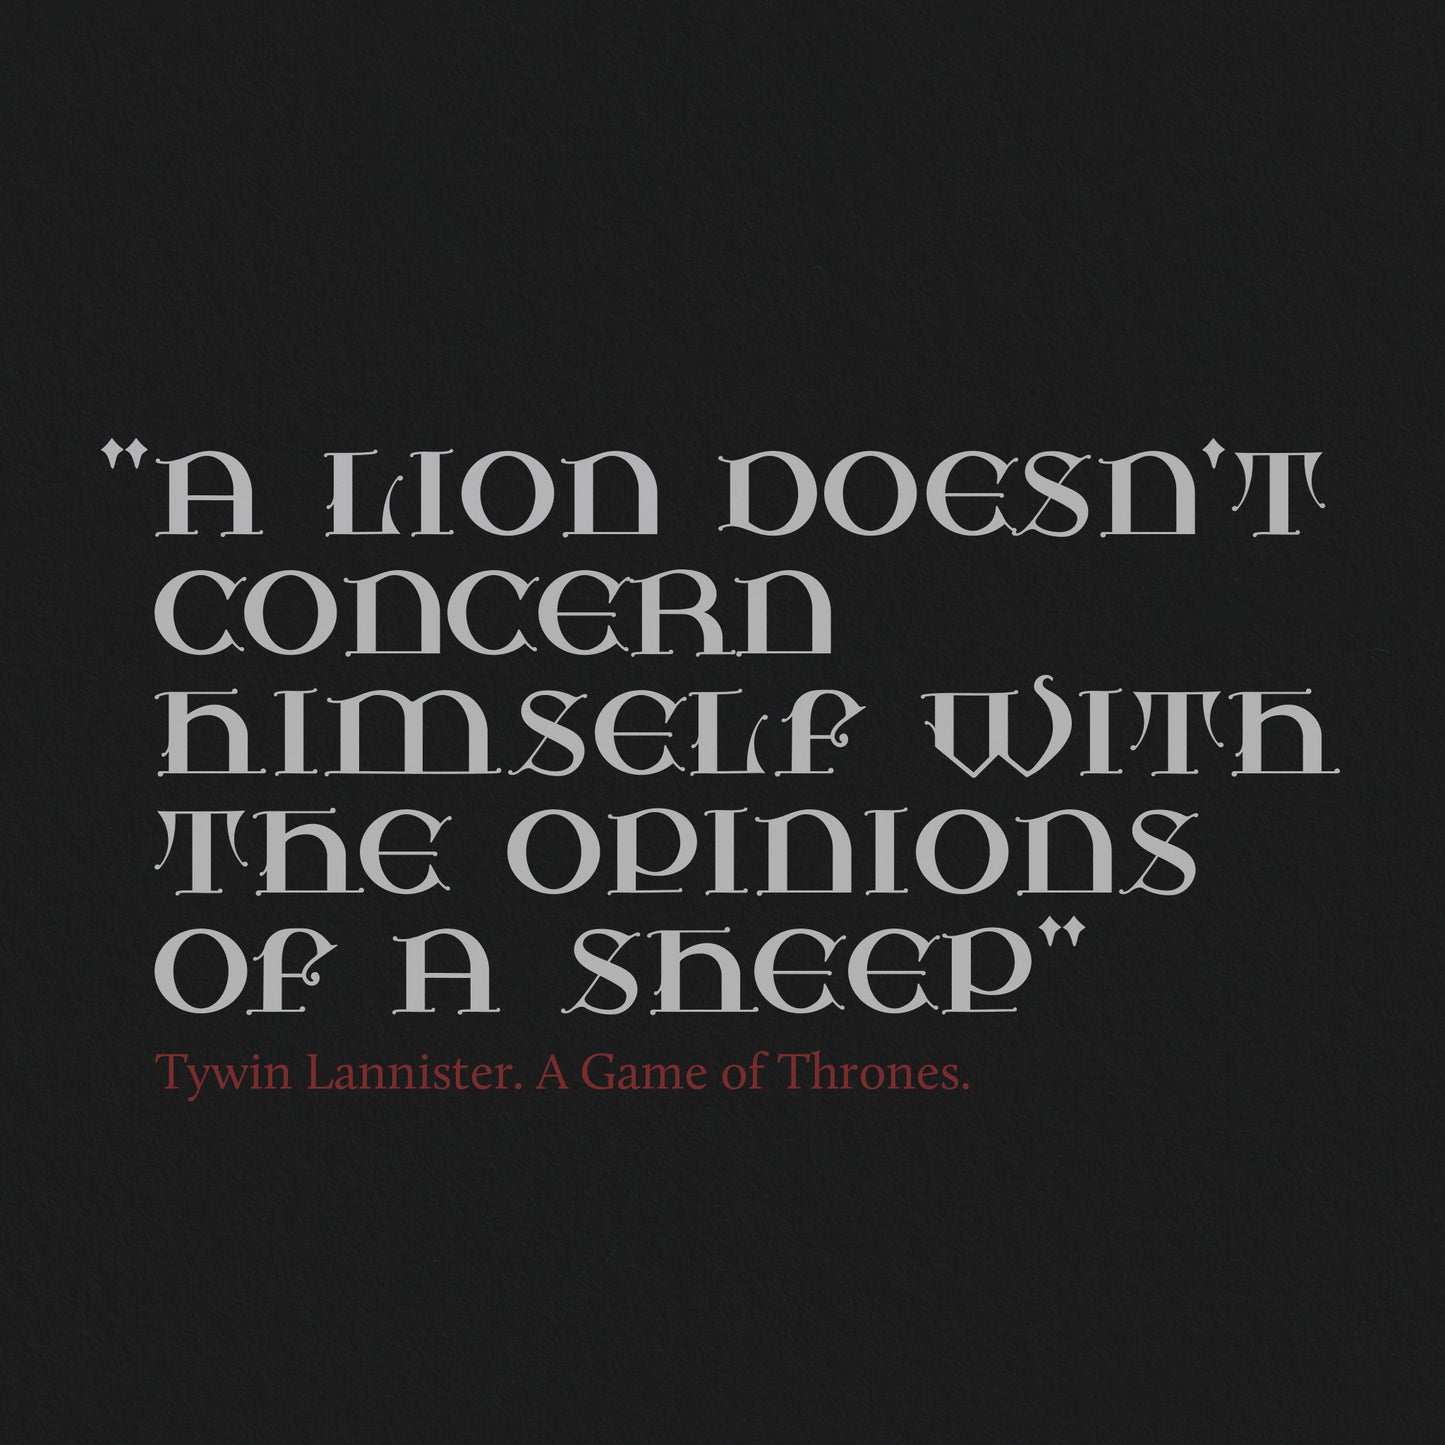 Dark background with light text showing a quote from A game of Thrones